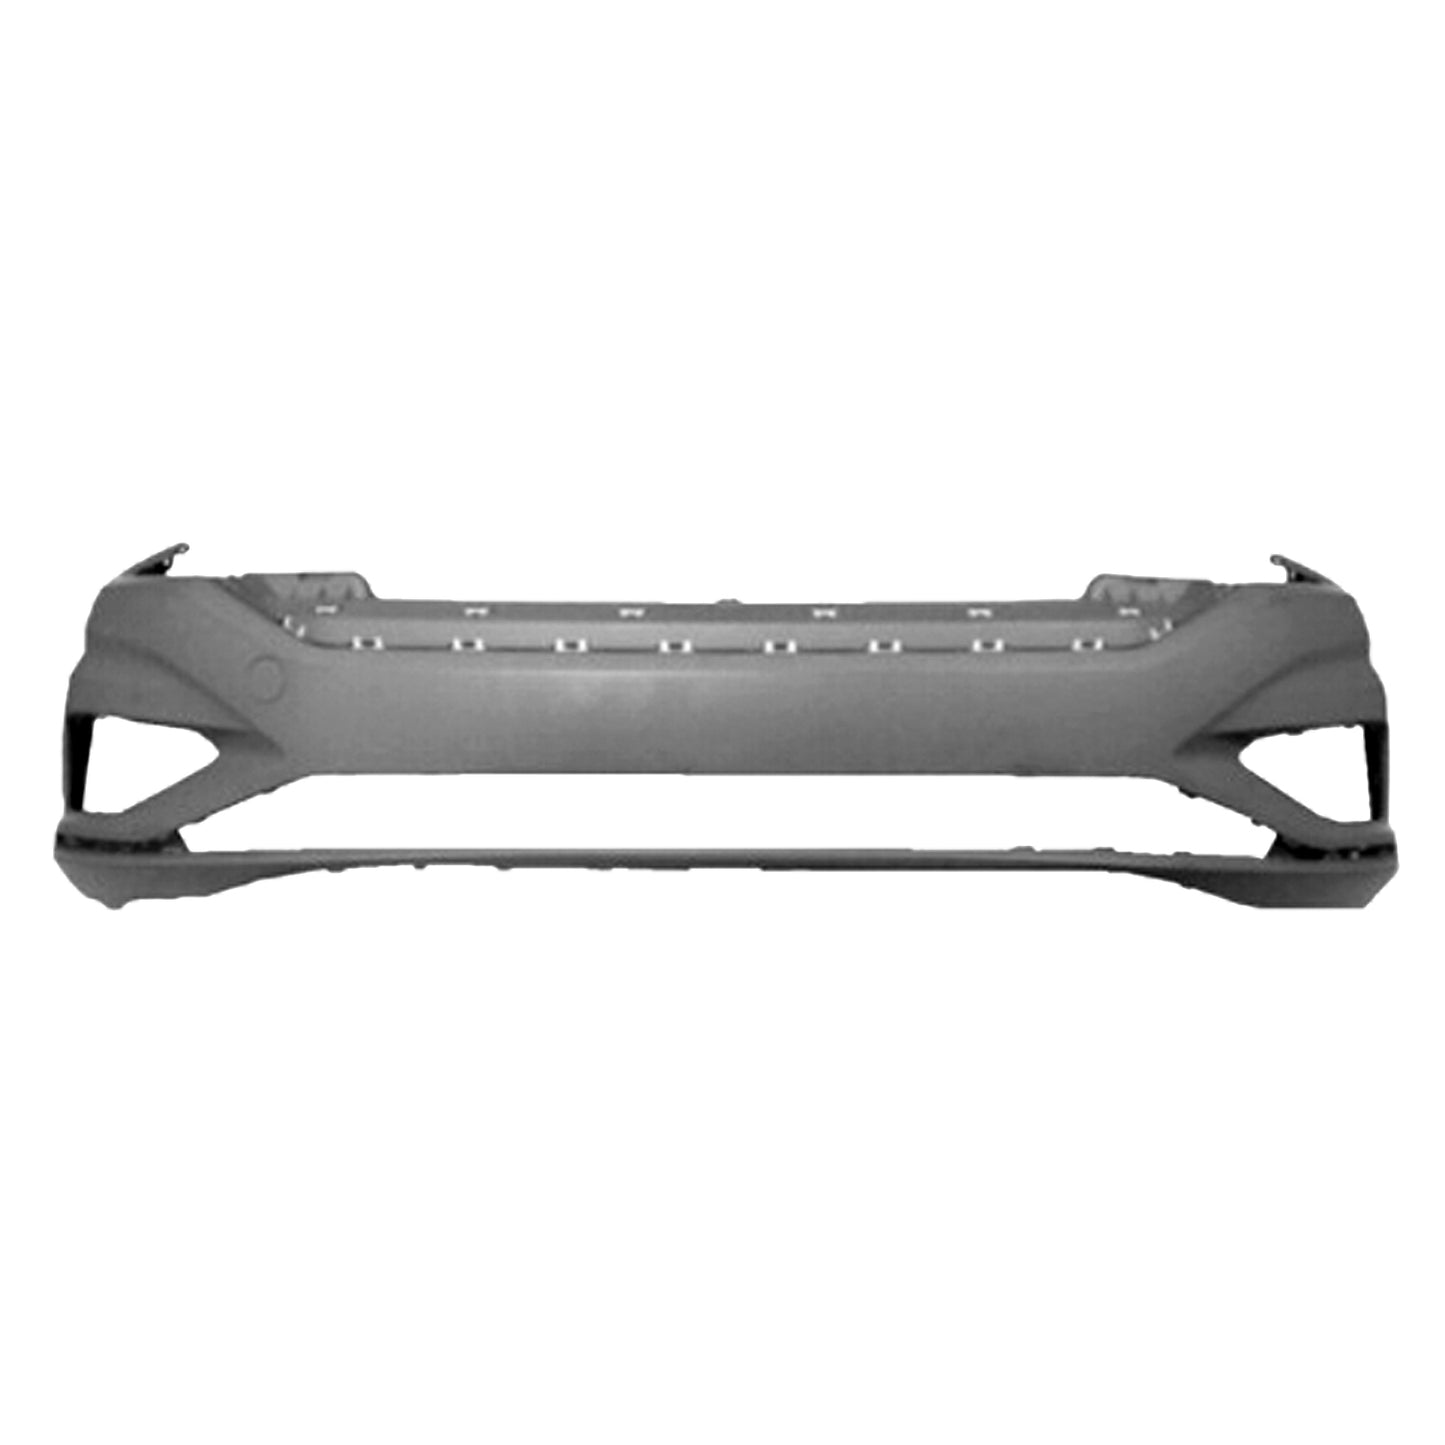 1000 | 2019-2021 VOLKSWAGEN JETTA Front bumper cover prime, without tow hook cover, without park assist sensor holes, except GLI models | VW1000239|17A807217GRU